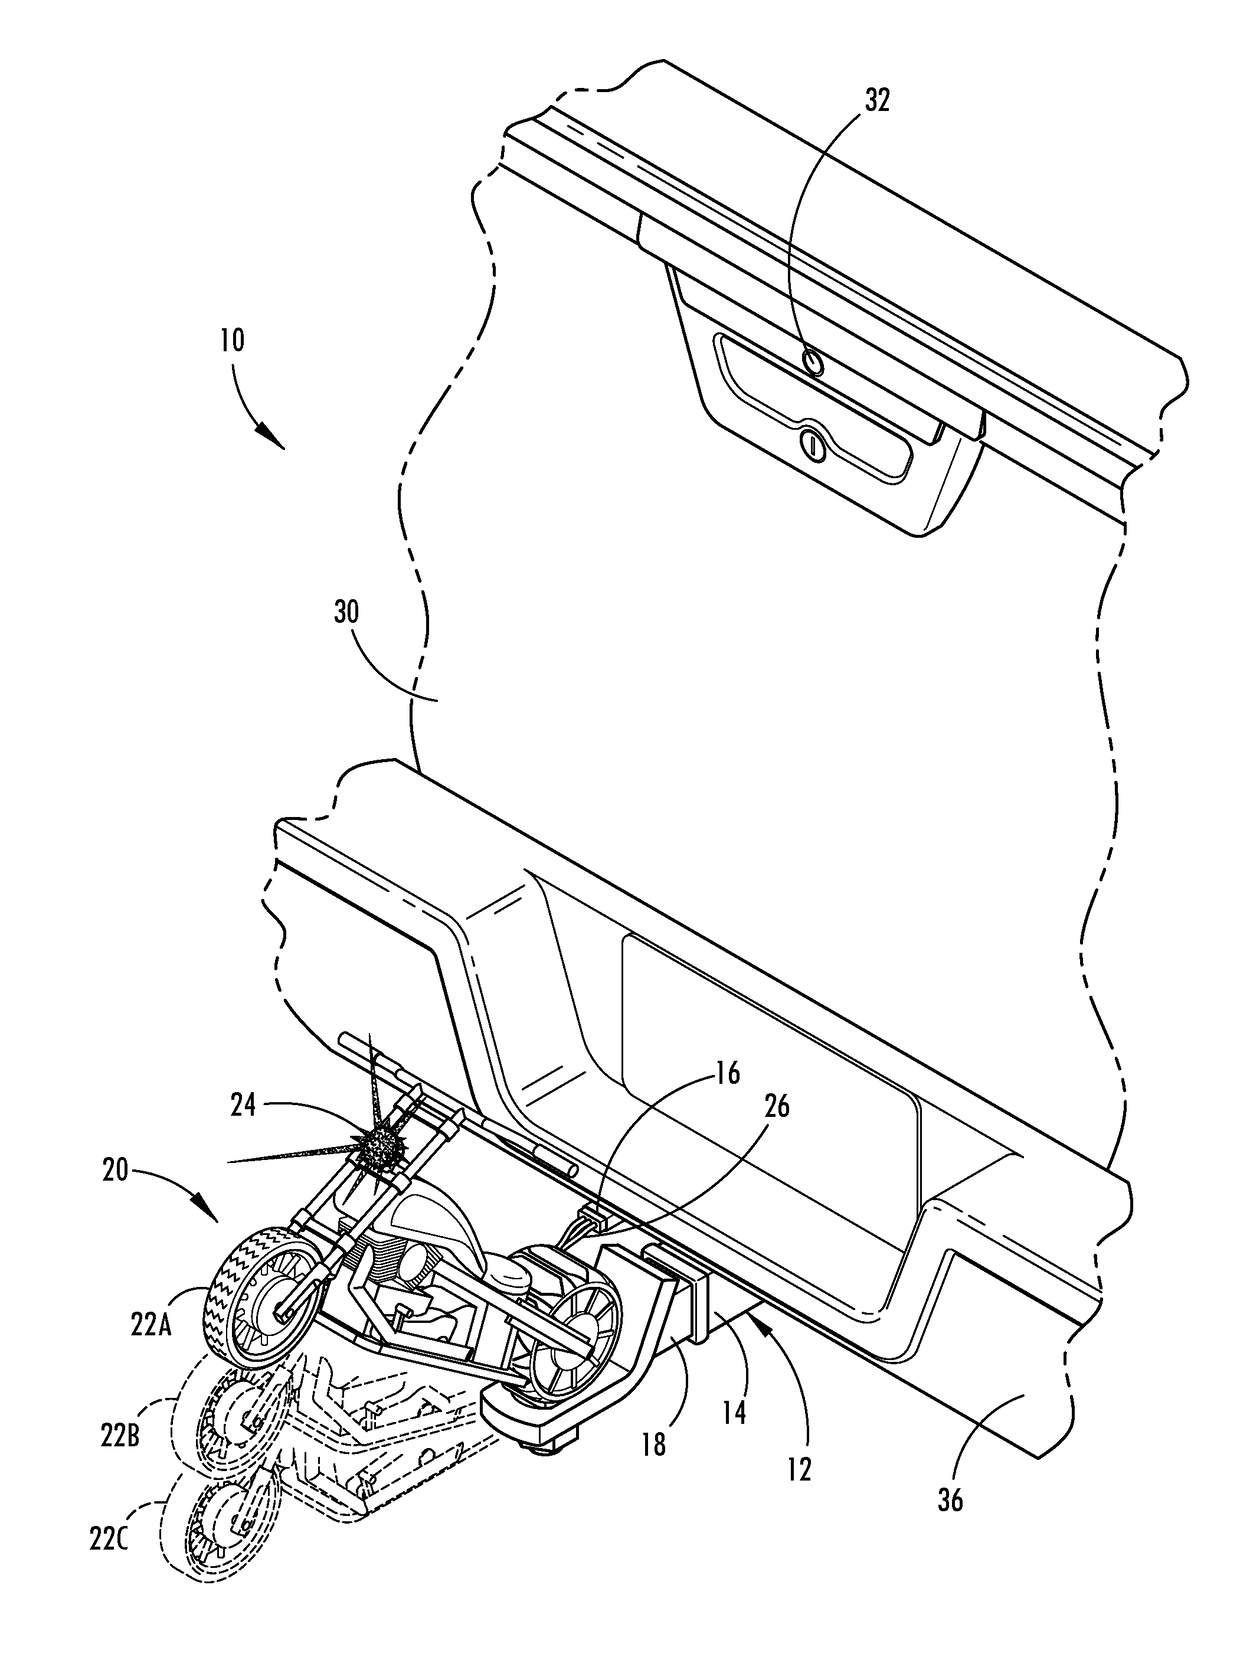 Vehicle hitch detection system and method